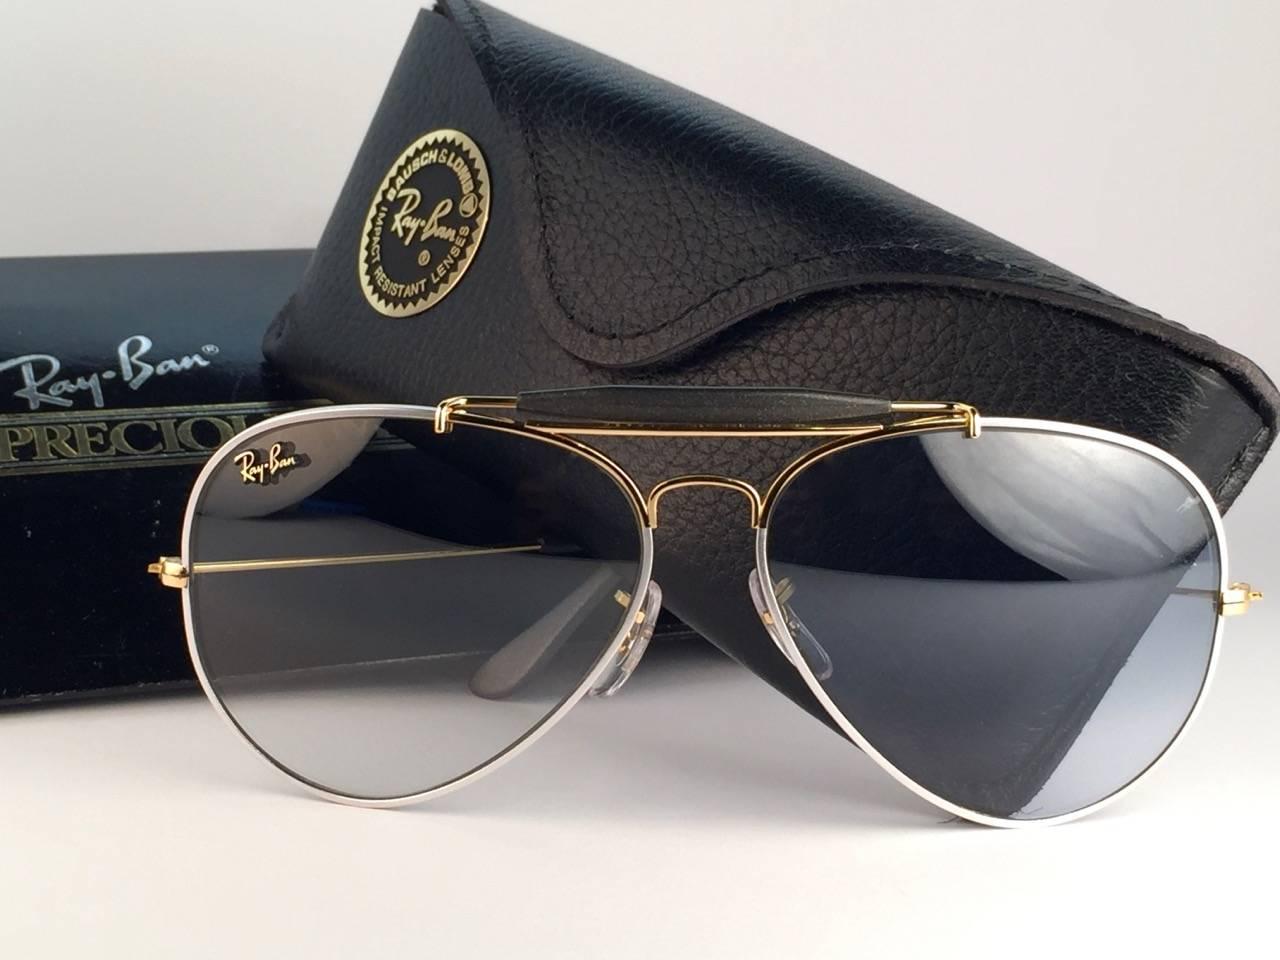 New Collectors Item Precious Metals Outdoorsman in 62mm with original case. Full set.  Frame is 24 k gold heavy plated combined with platinum.  The lenses are amazing blue changeable with a gradient and slight mirror. Ray Ban logo is on top of the